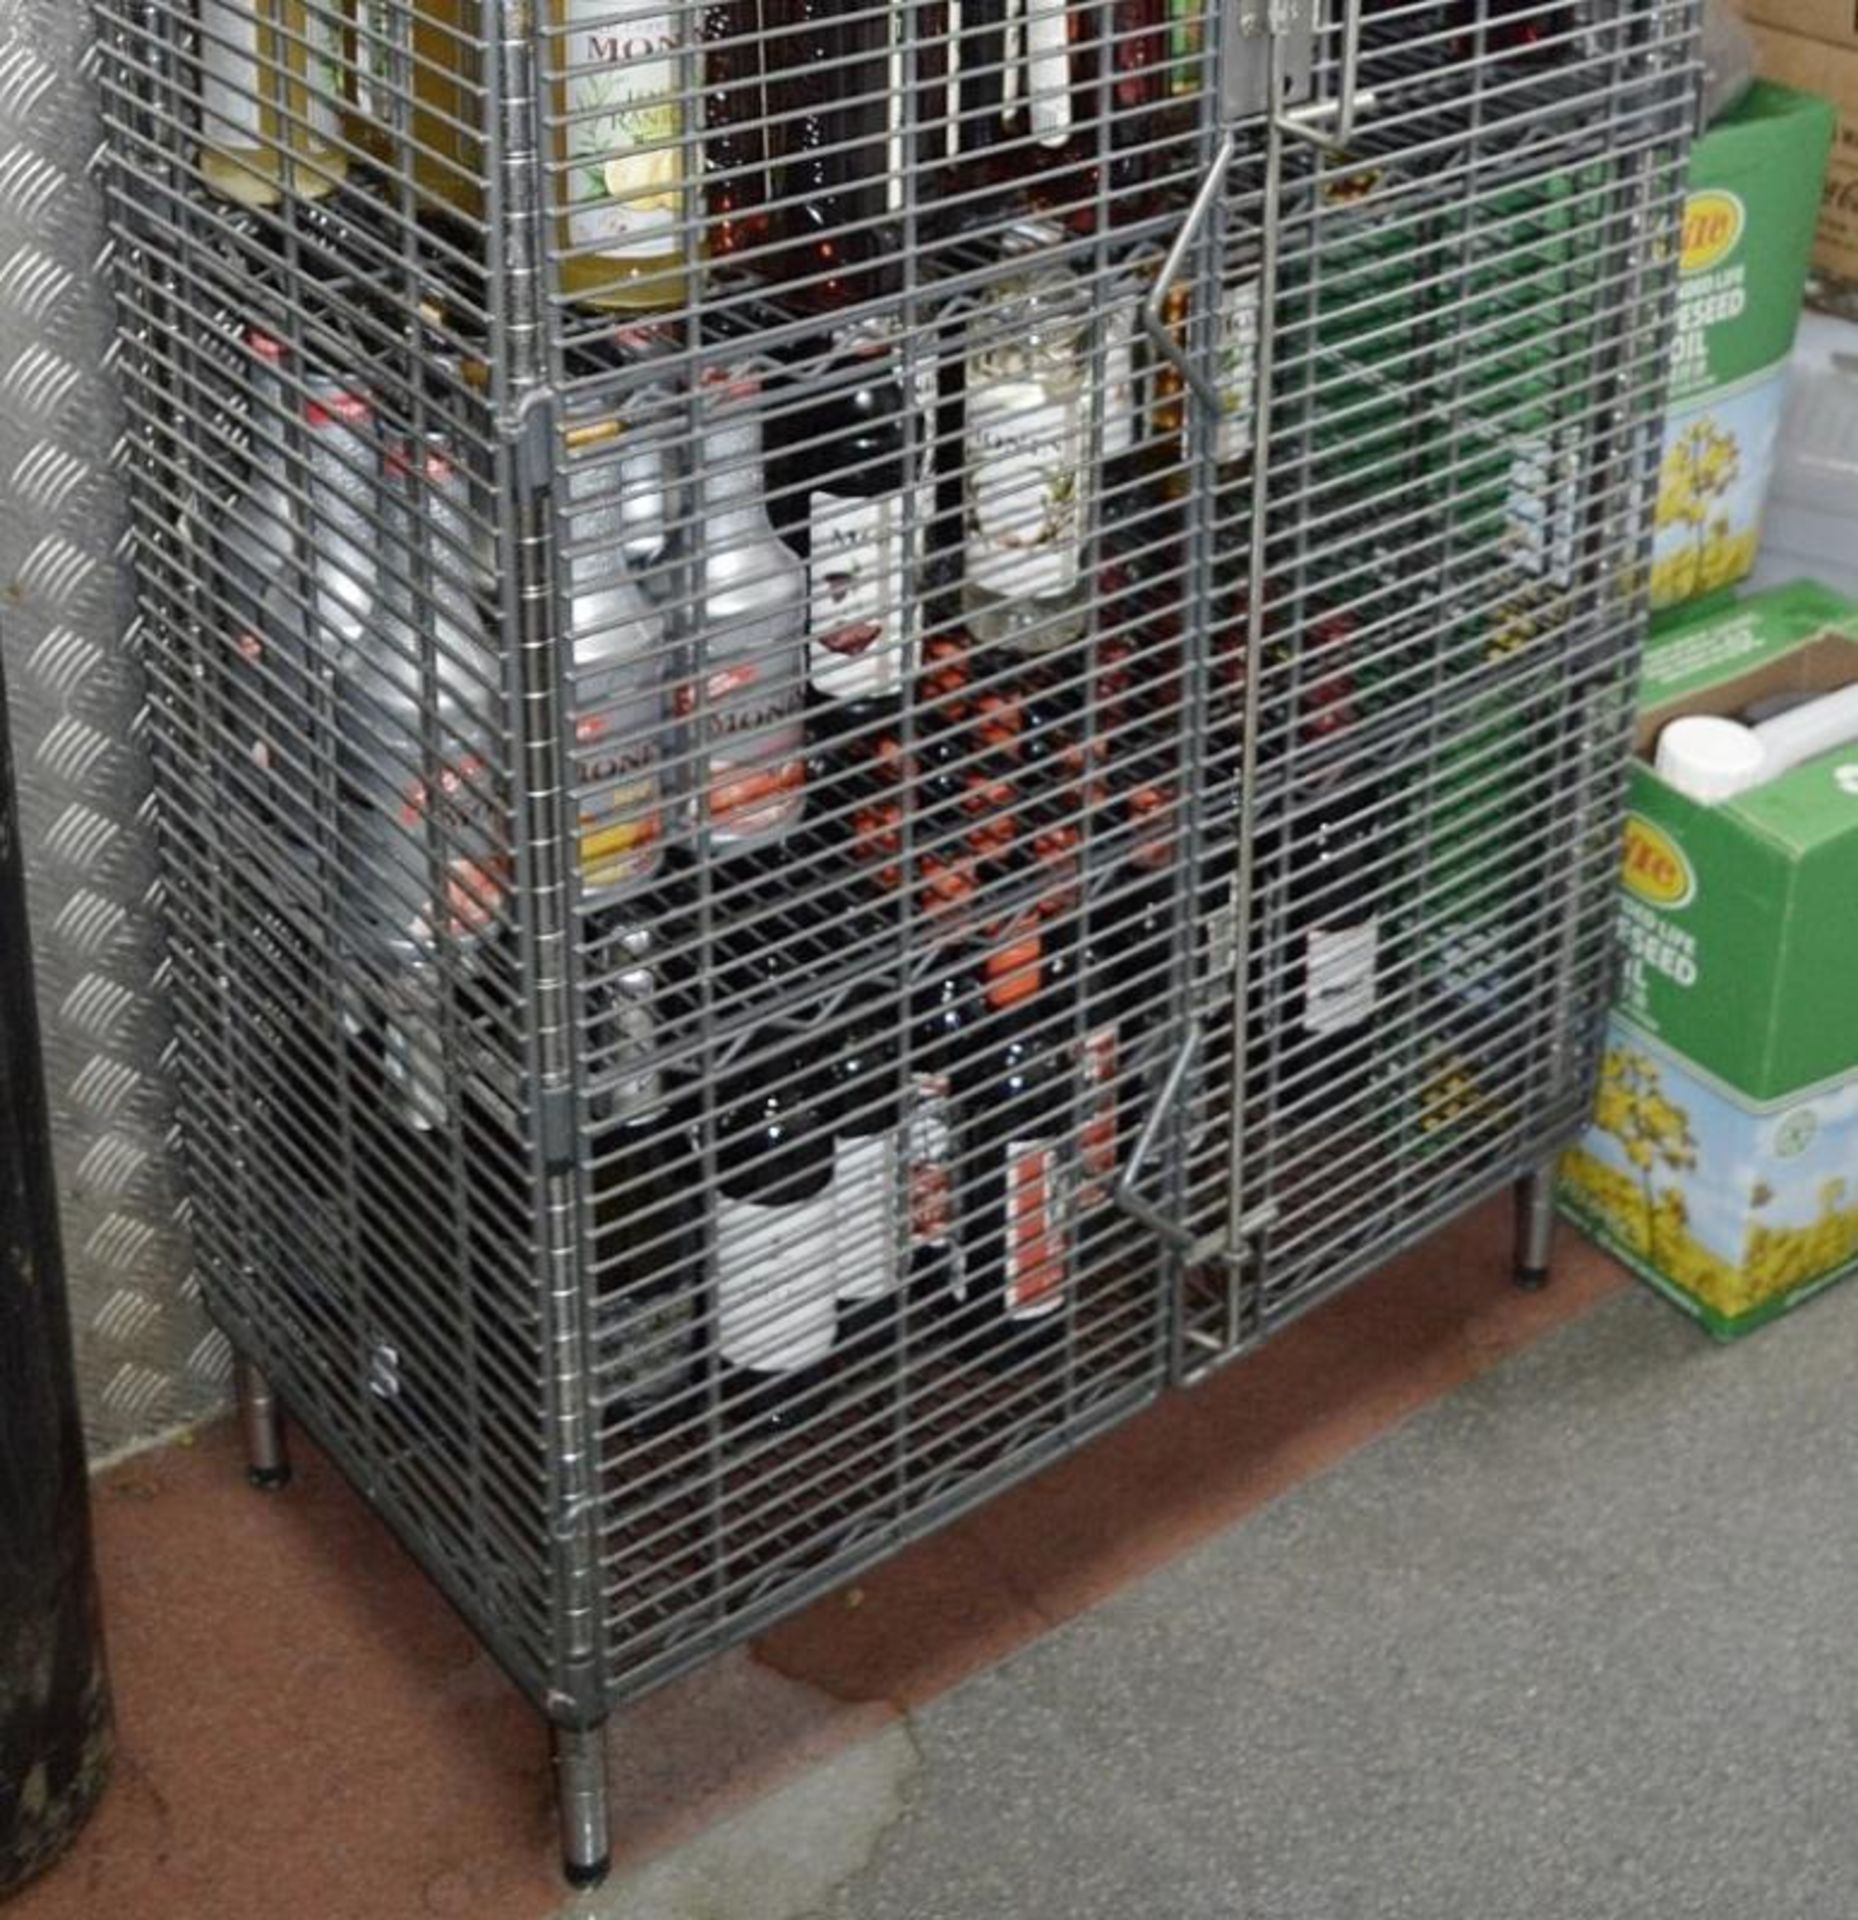 1 x Wines / Spirits Lockable Security Cage - H160 x W80 x D40 cms - CL357 - Location: Bolton BL1 - Image 3 of 3